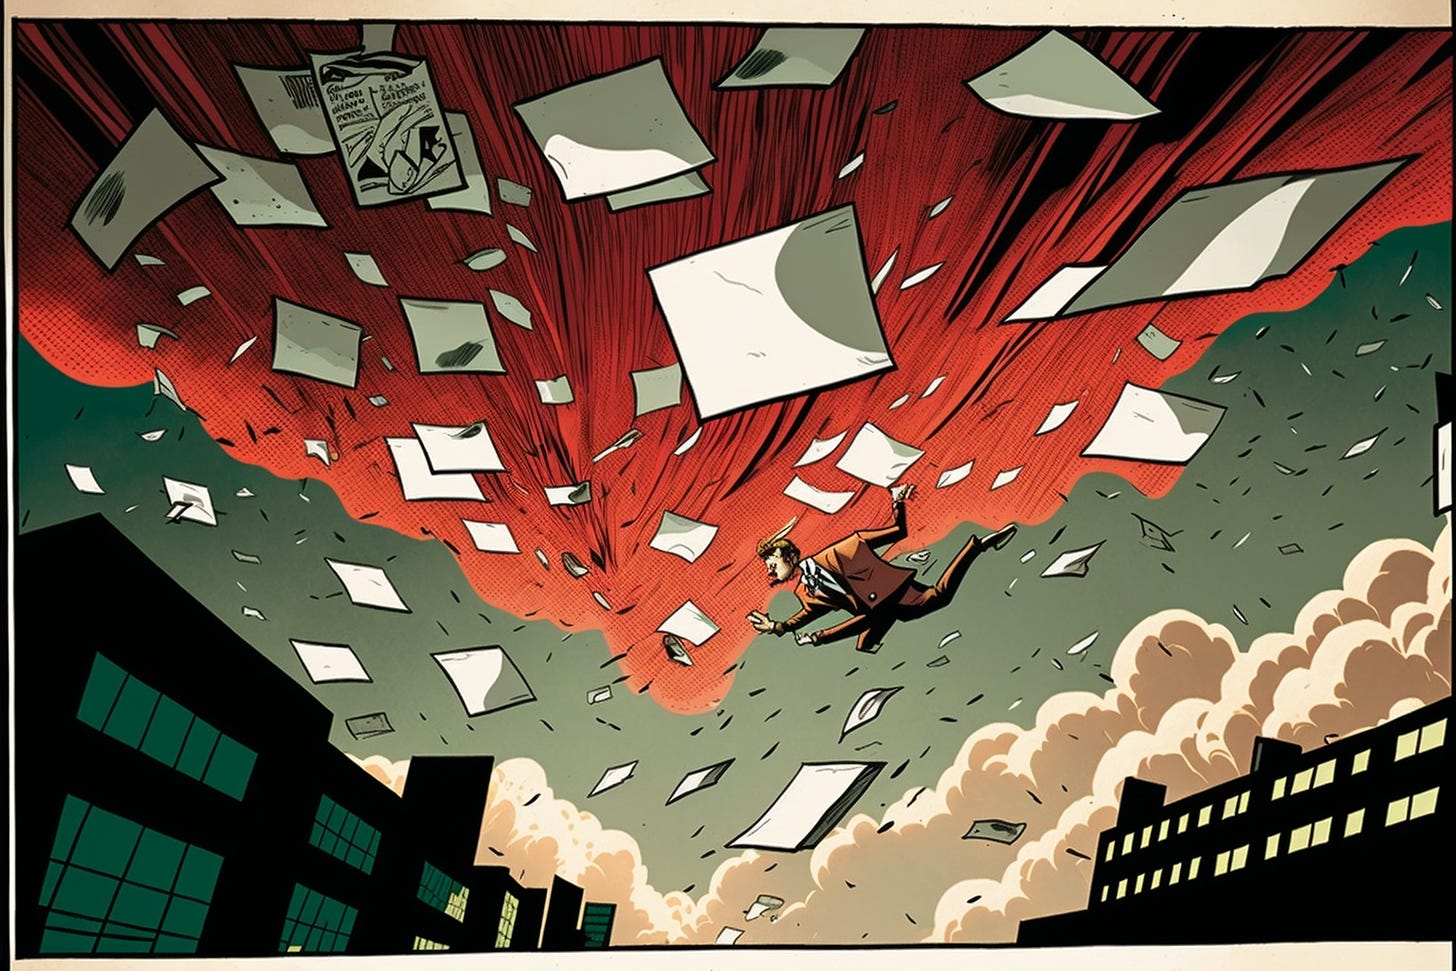 emails flying though the air, graphic novel